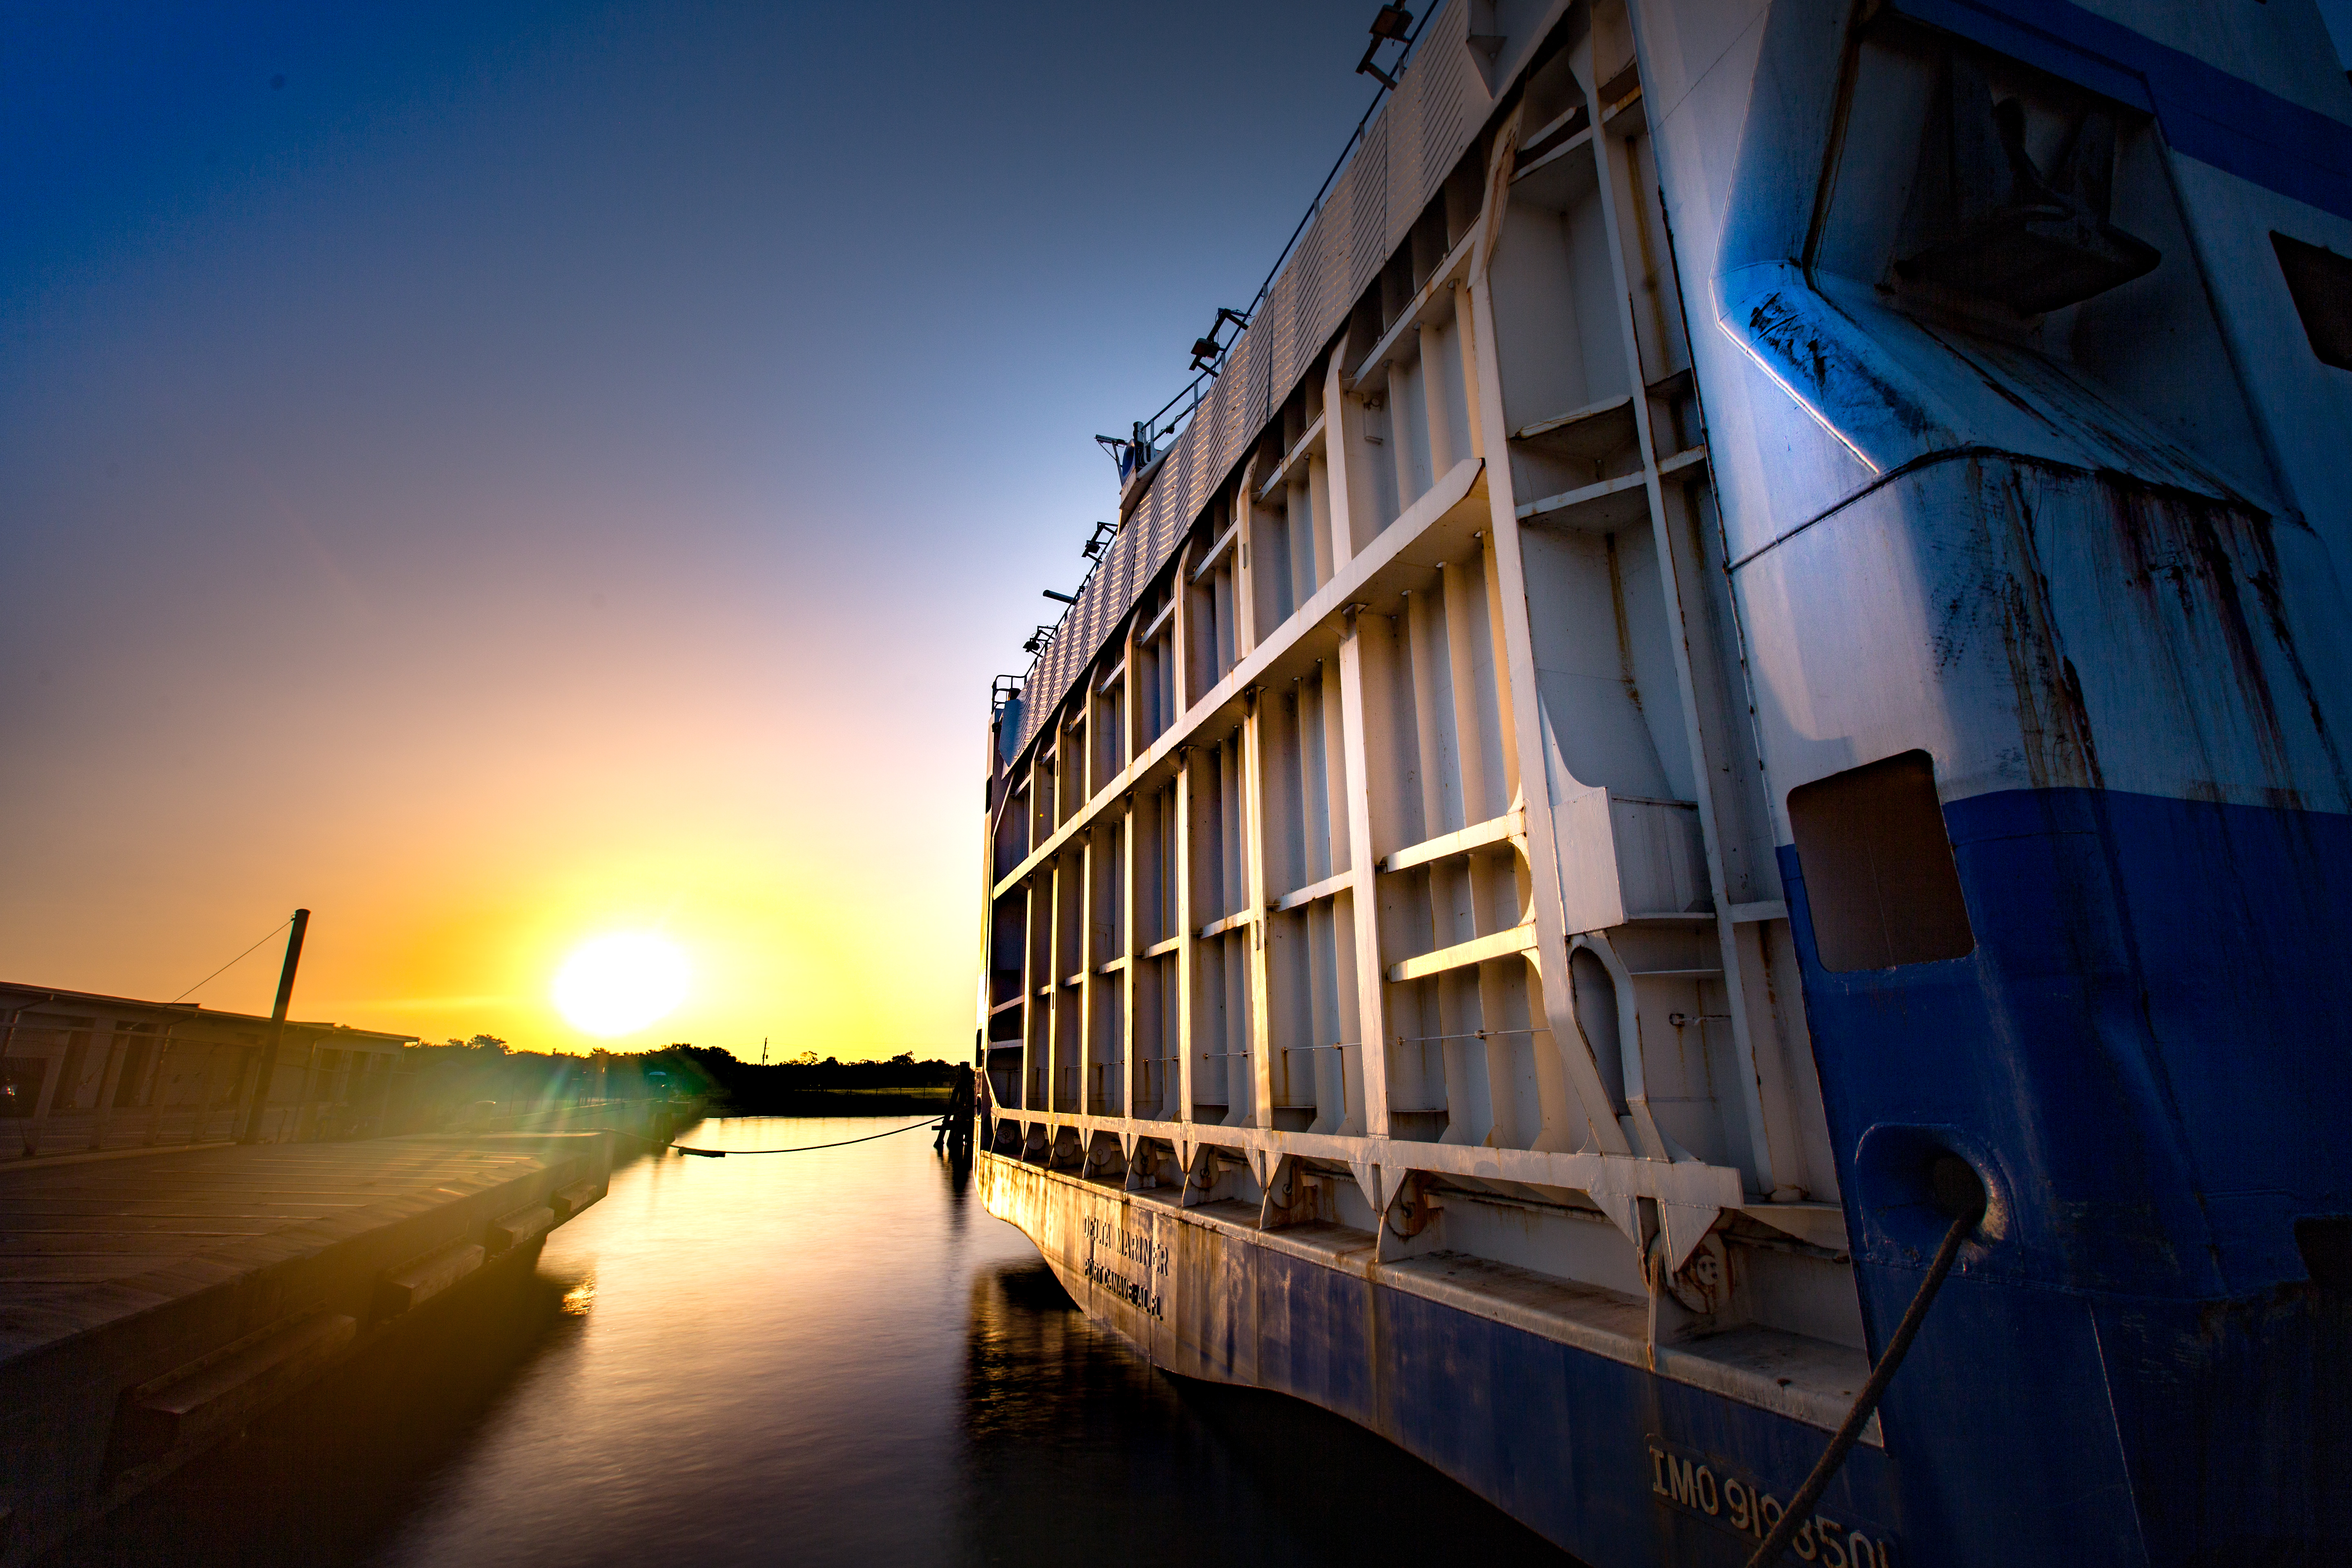 Sunrise is reflected in the side of the Mariner ship and in the water of Port Canaveral below. 